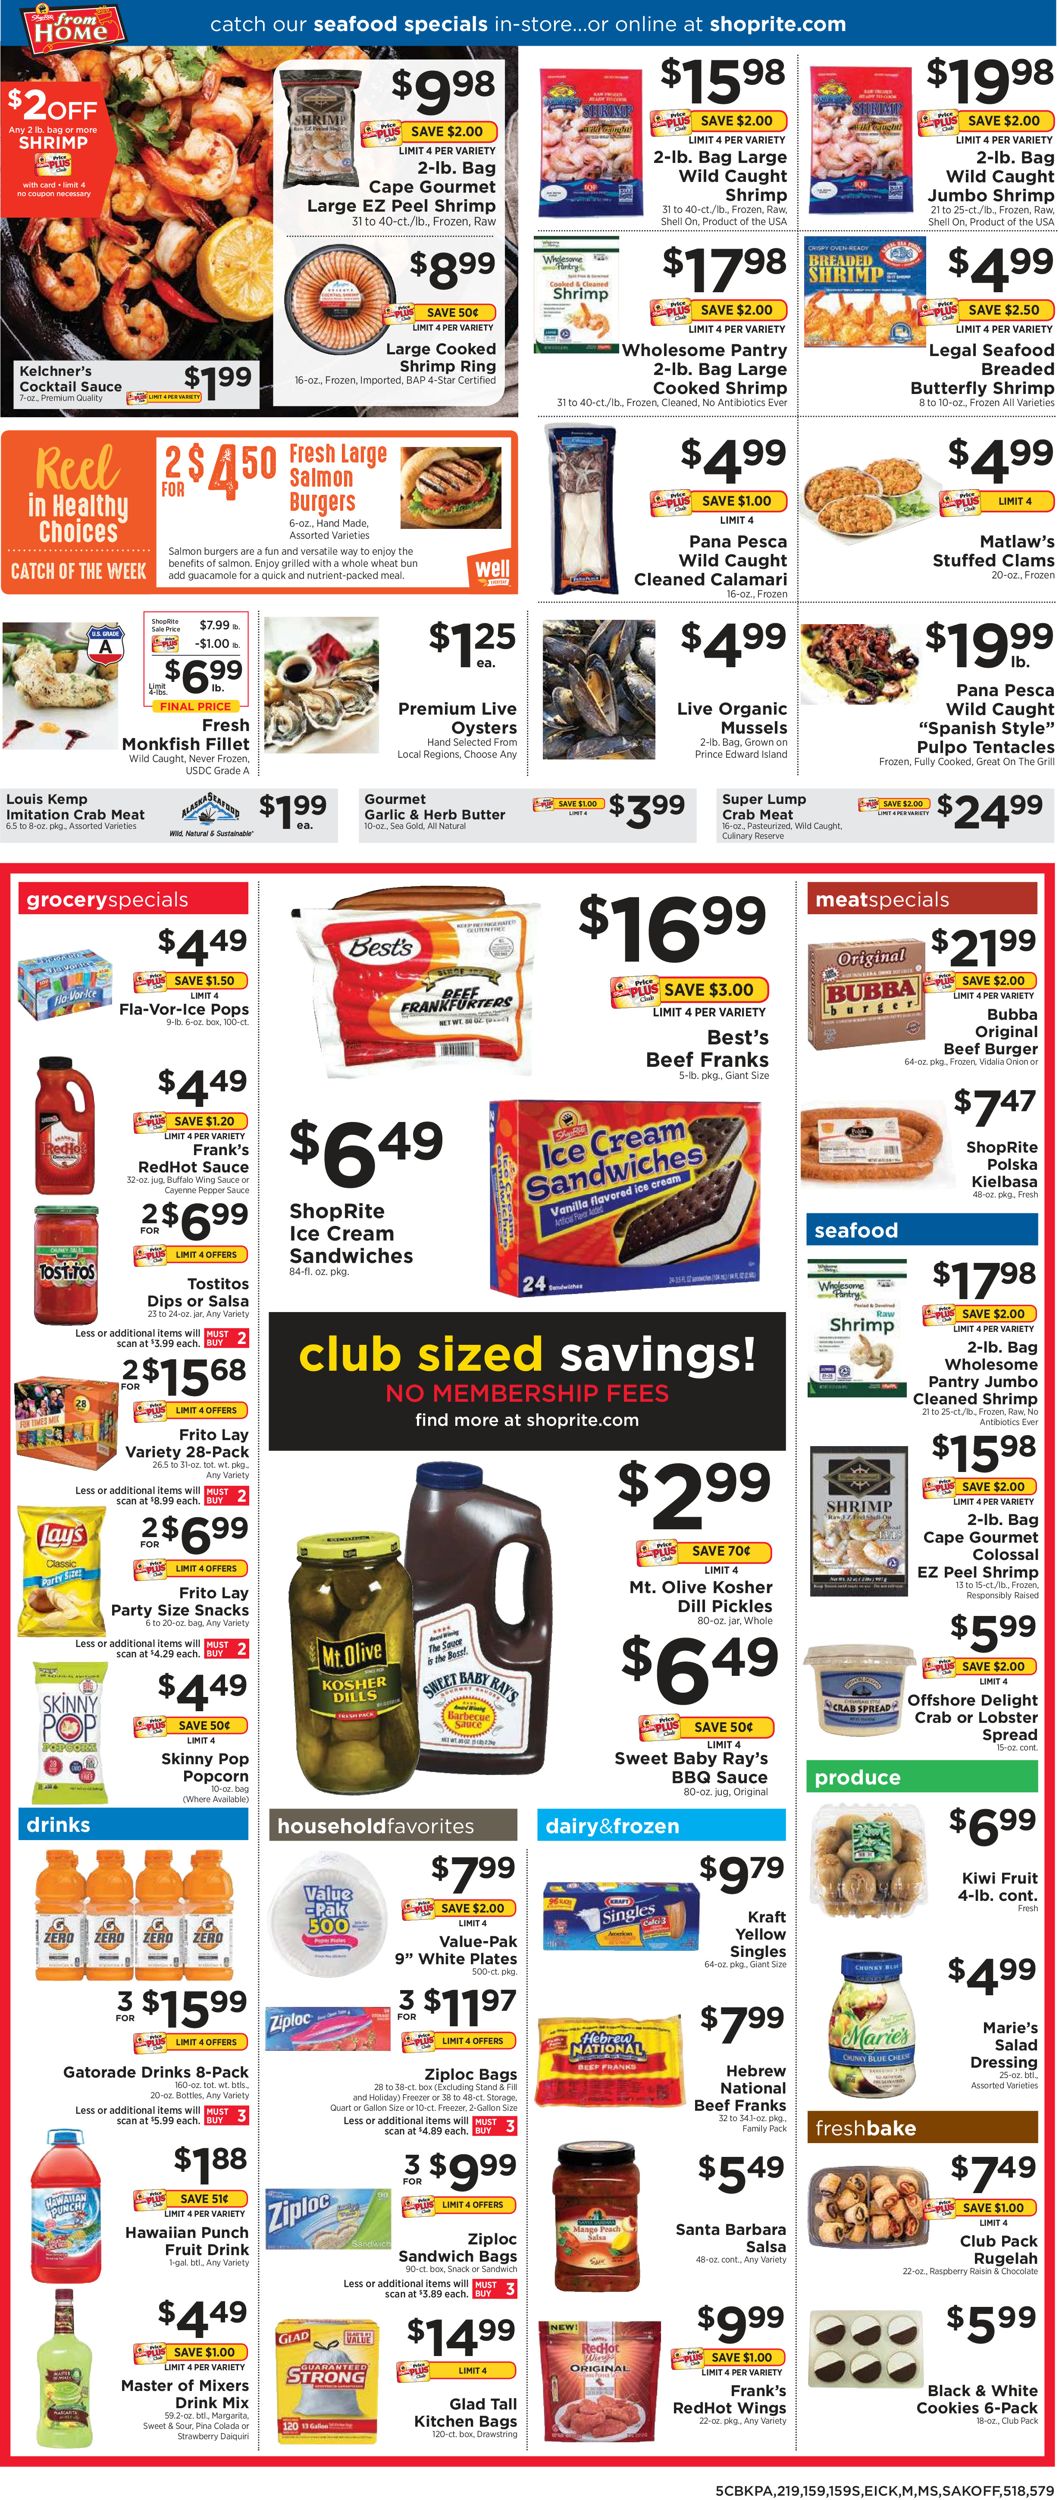 ShopRite Current weekly ad 05/19 - 05/25/2019 [5] - frequent-ads.com